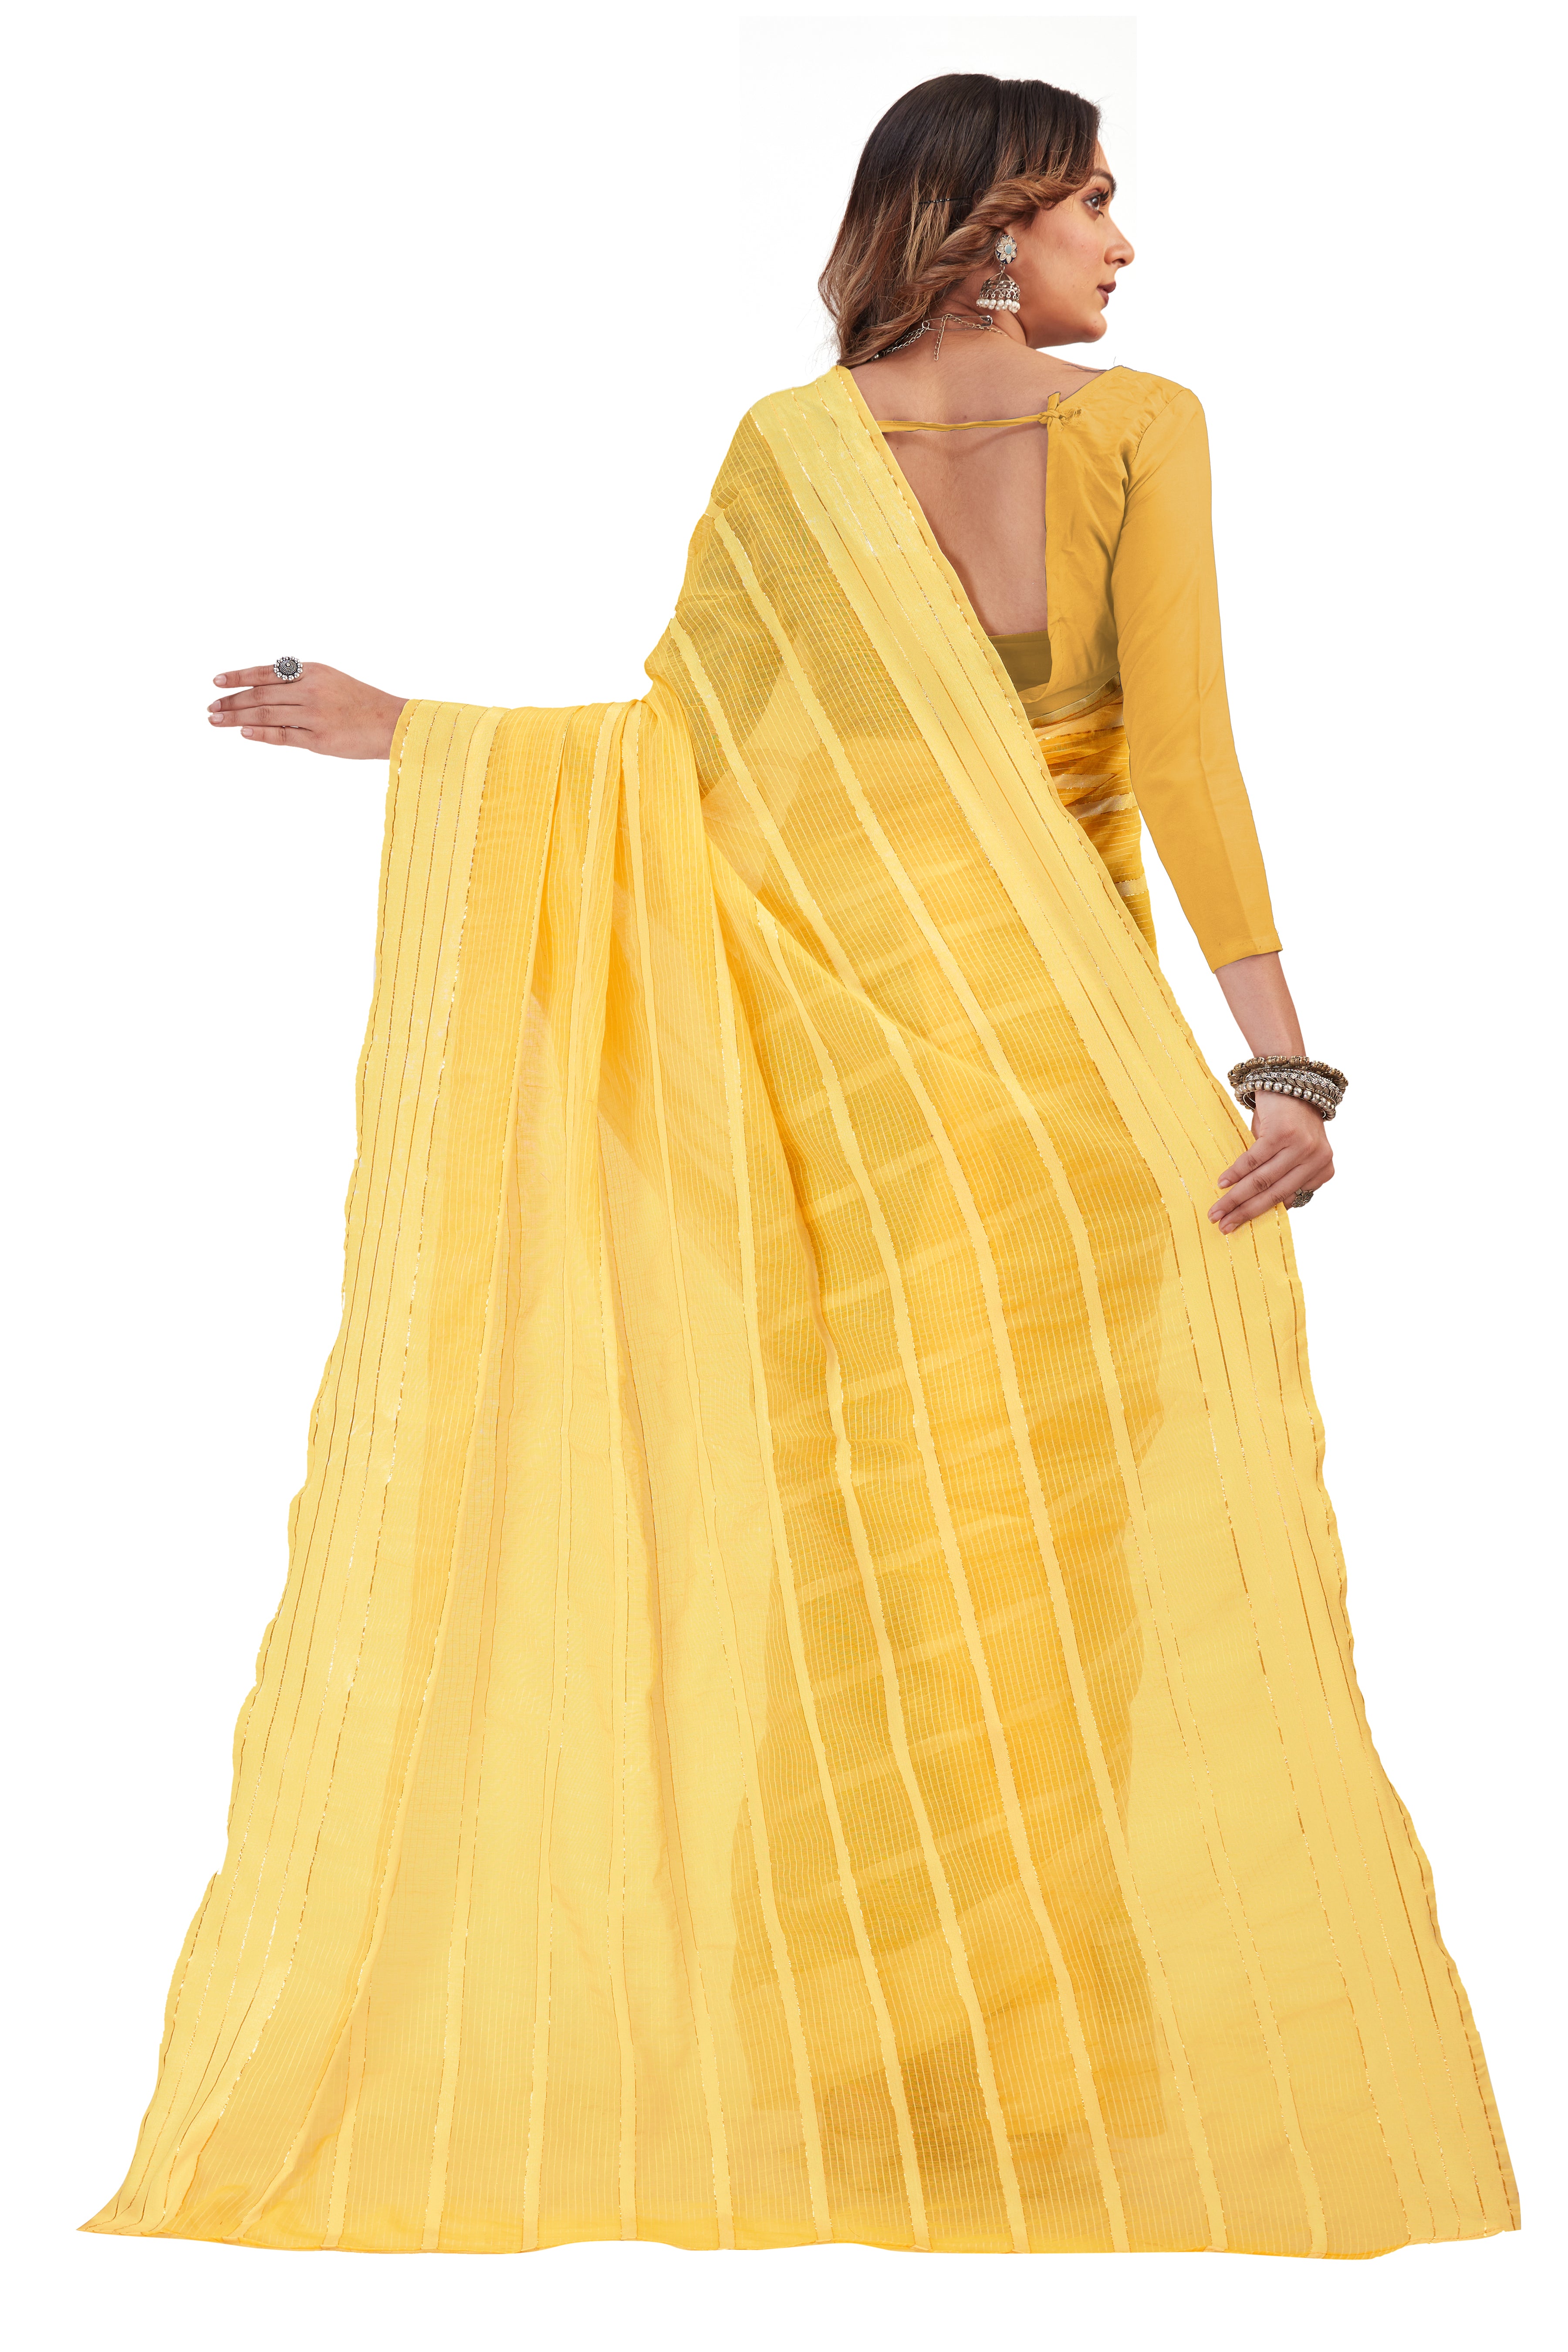 Women's self Woven striped Daily Wear Cotton Blend Sari With Blouse Piece (Yellow) - NIMIDHYA